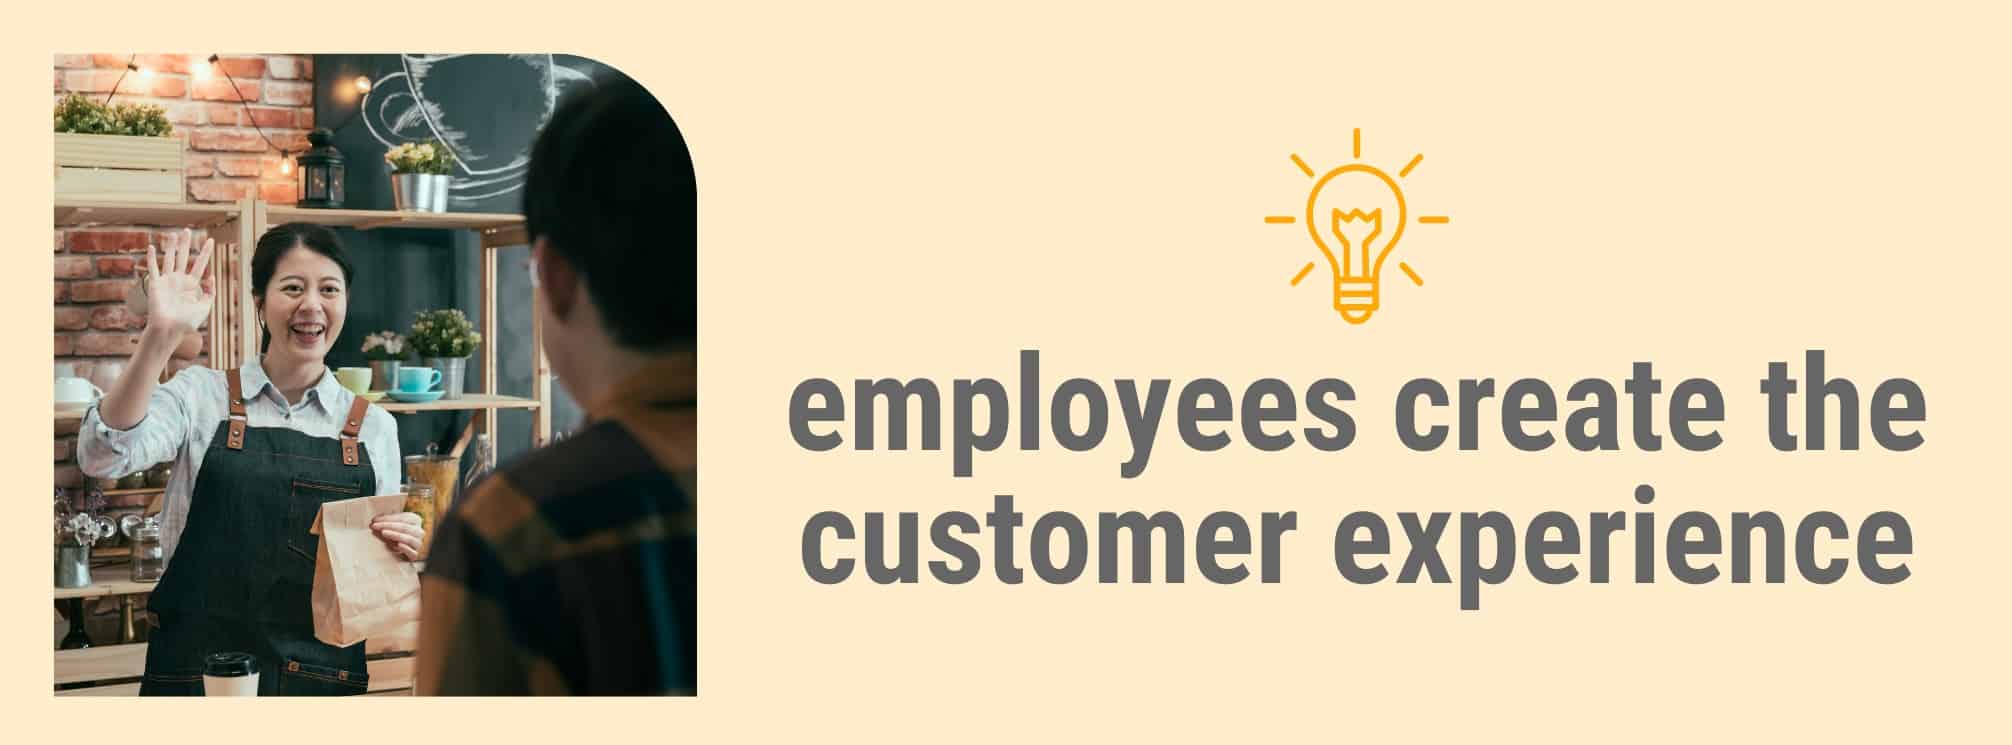 graphic with a restaurant employee warmly greeting a customer with the text "employees create the customer experience"